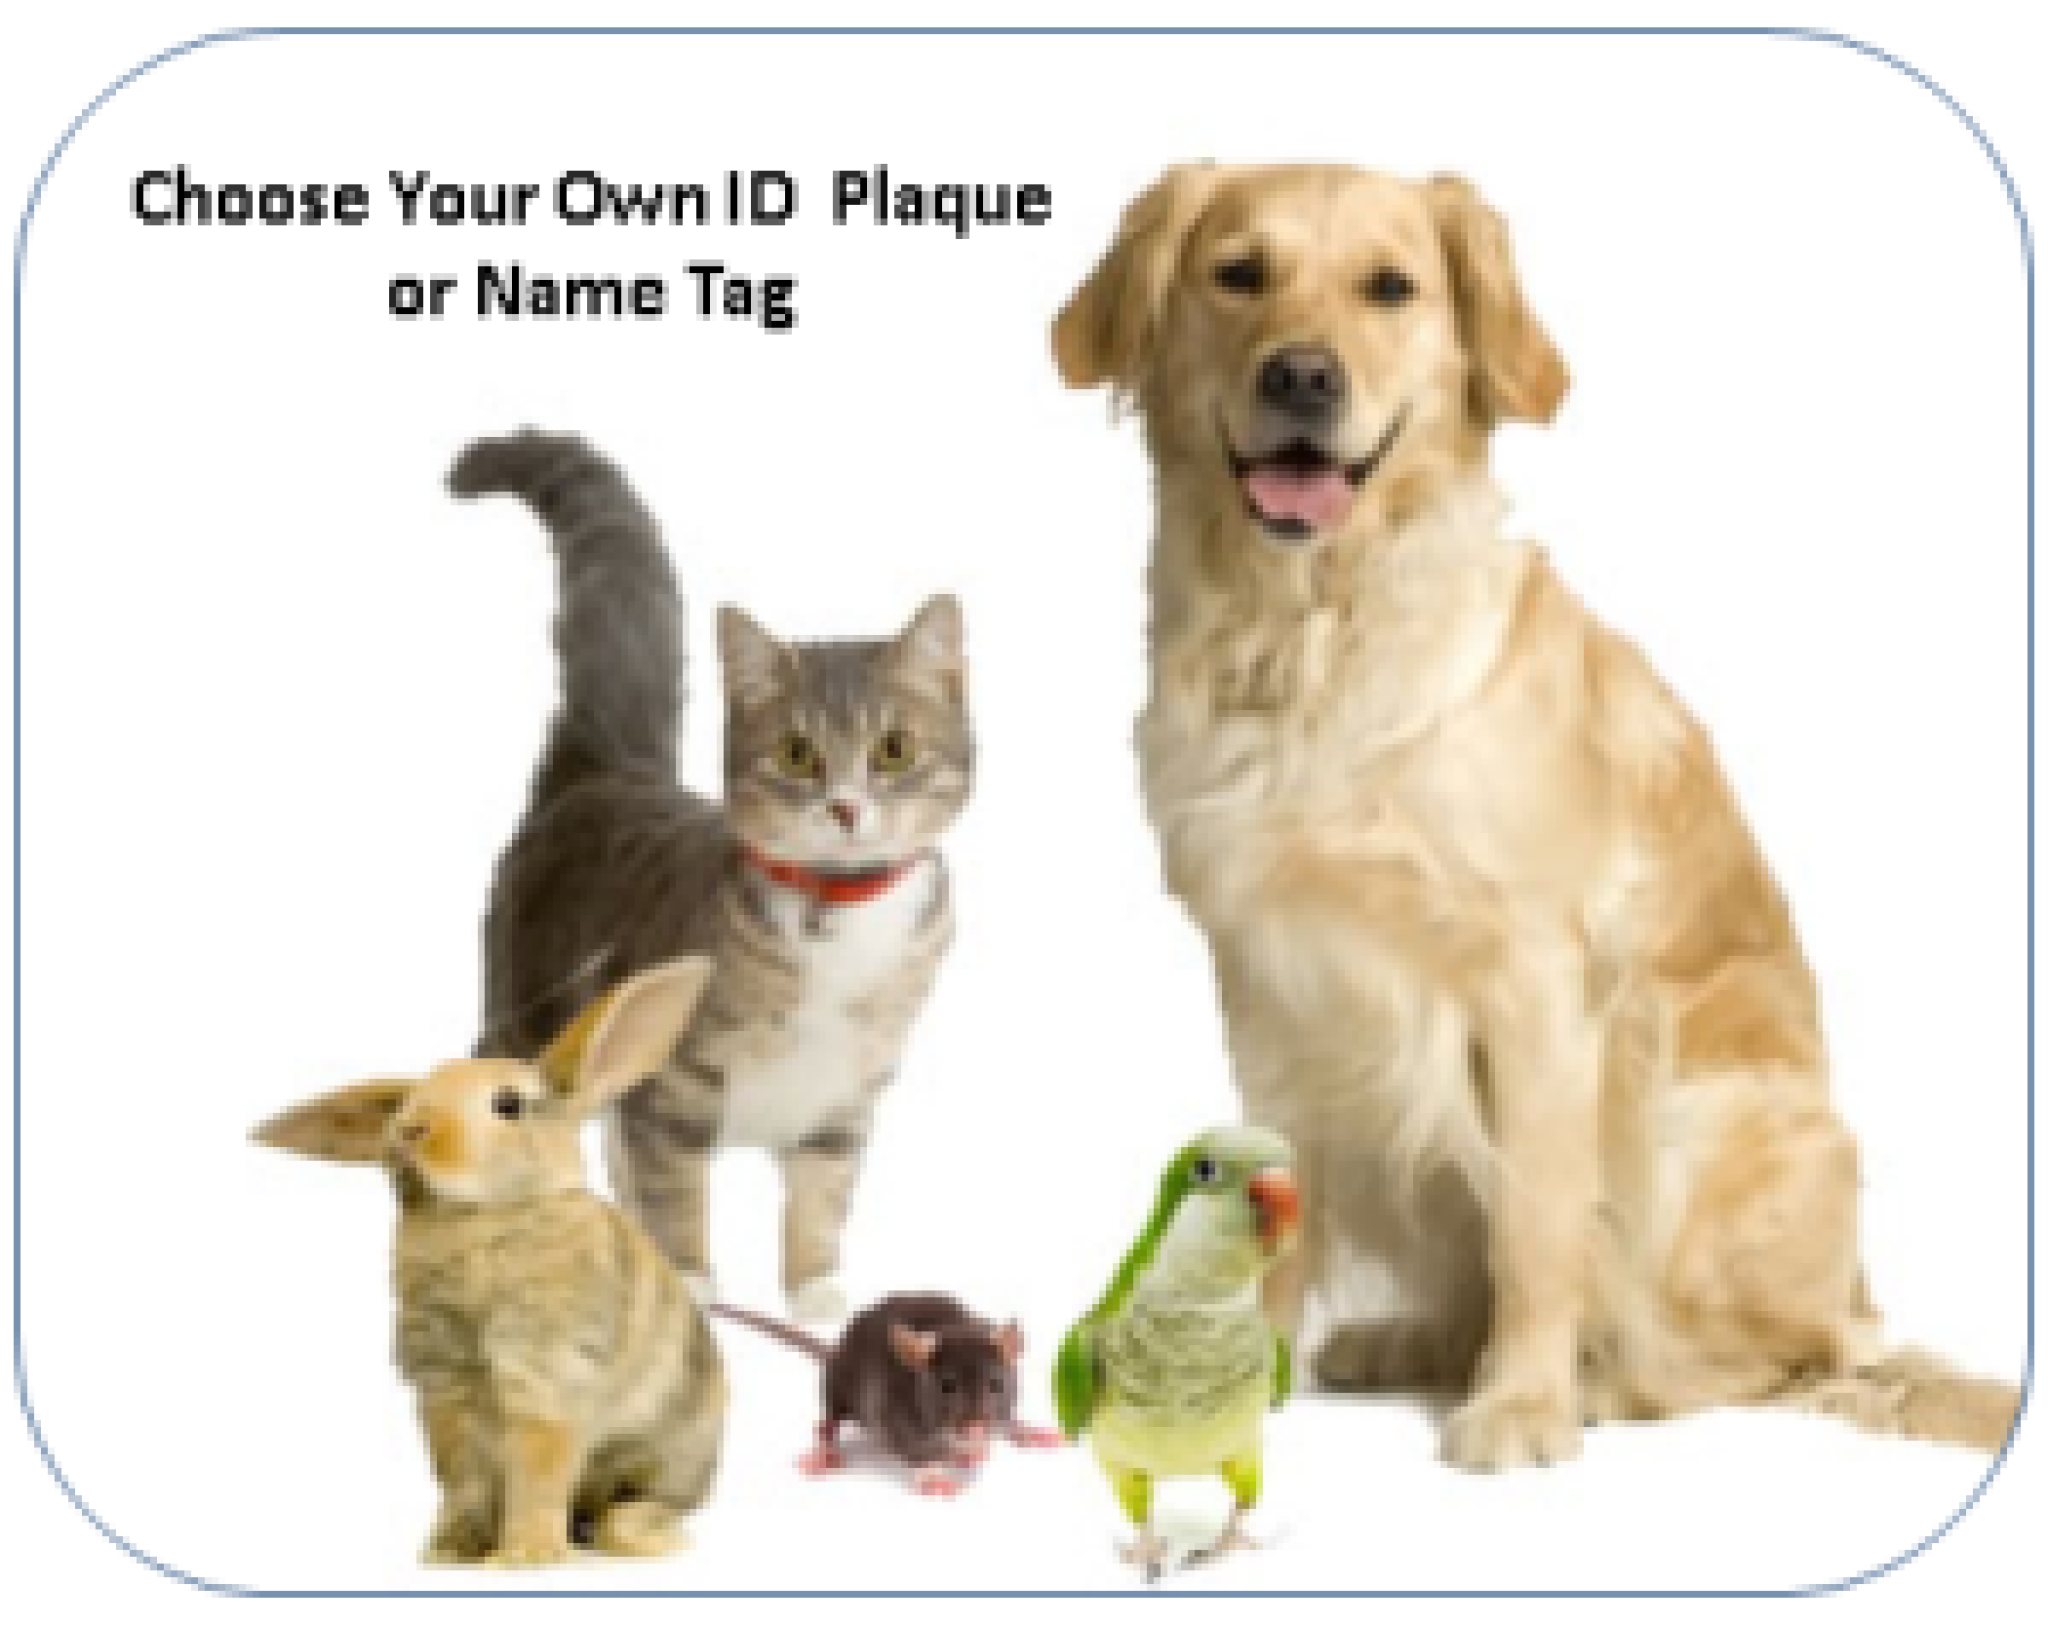 name-tag-300x238.png